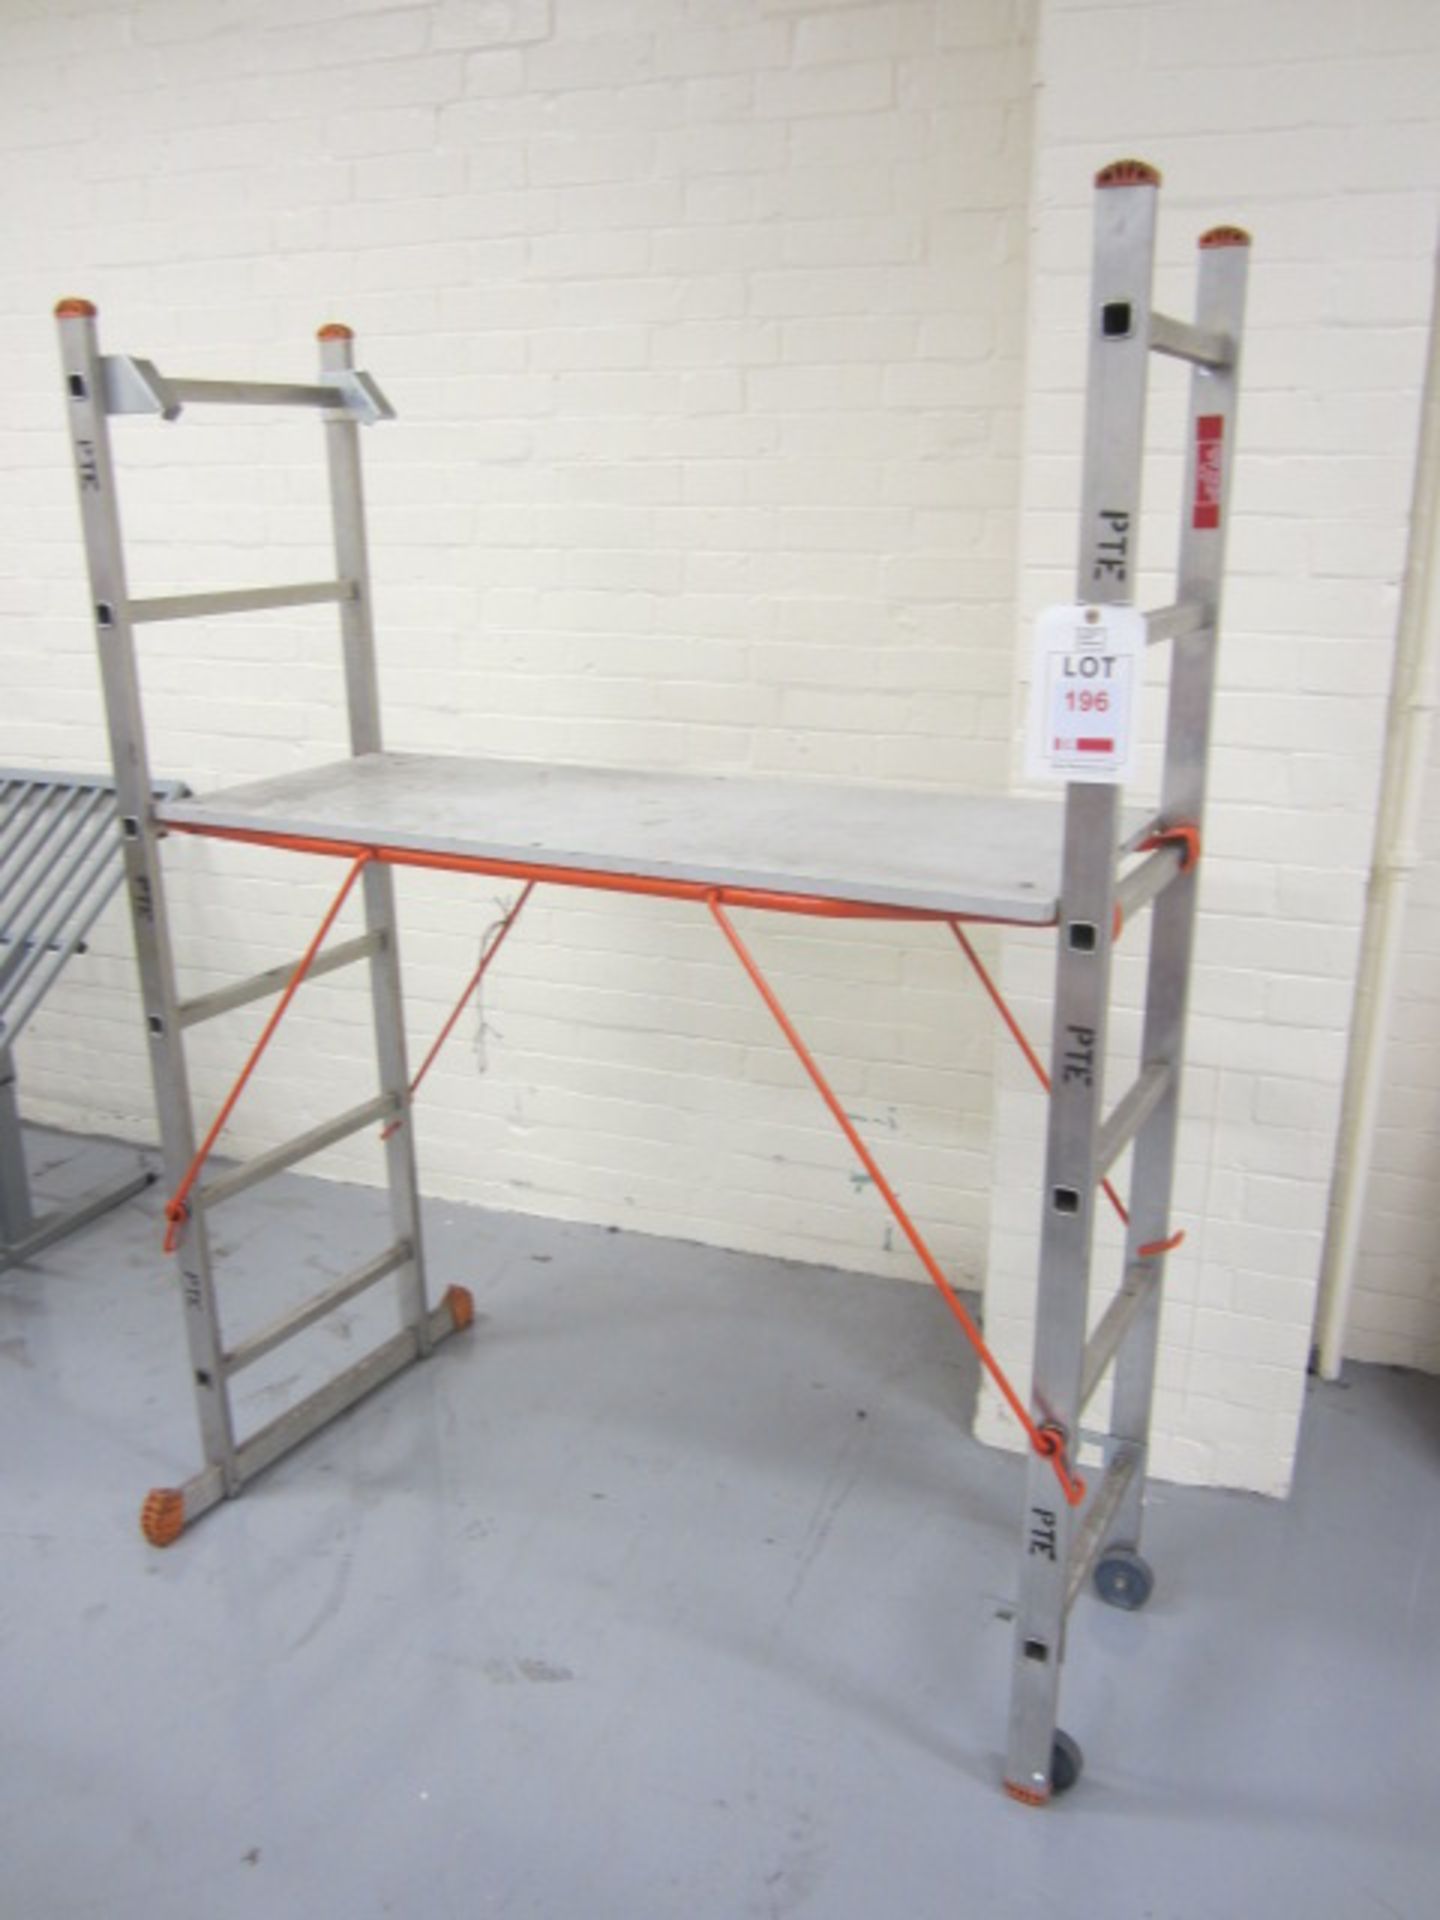 Working platform, approx. dimension: width 1330mm x depth 460mm x height: 1.7m. - Lift out charge to